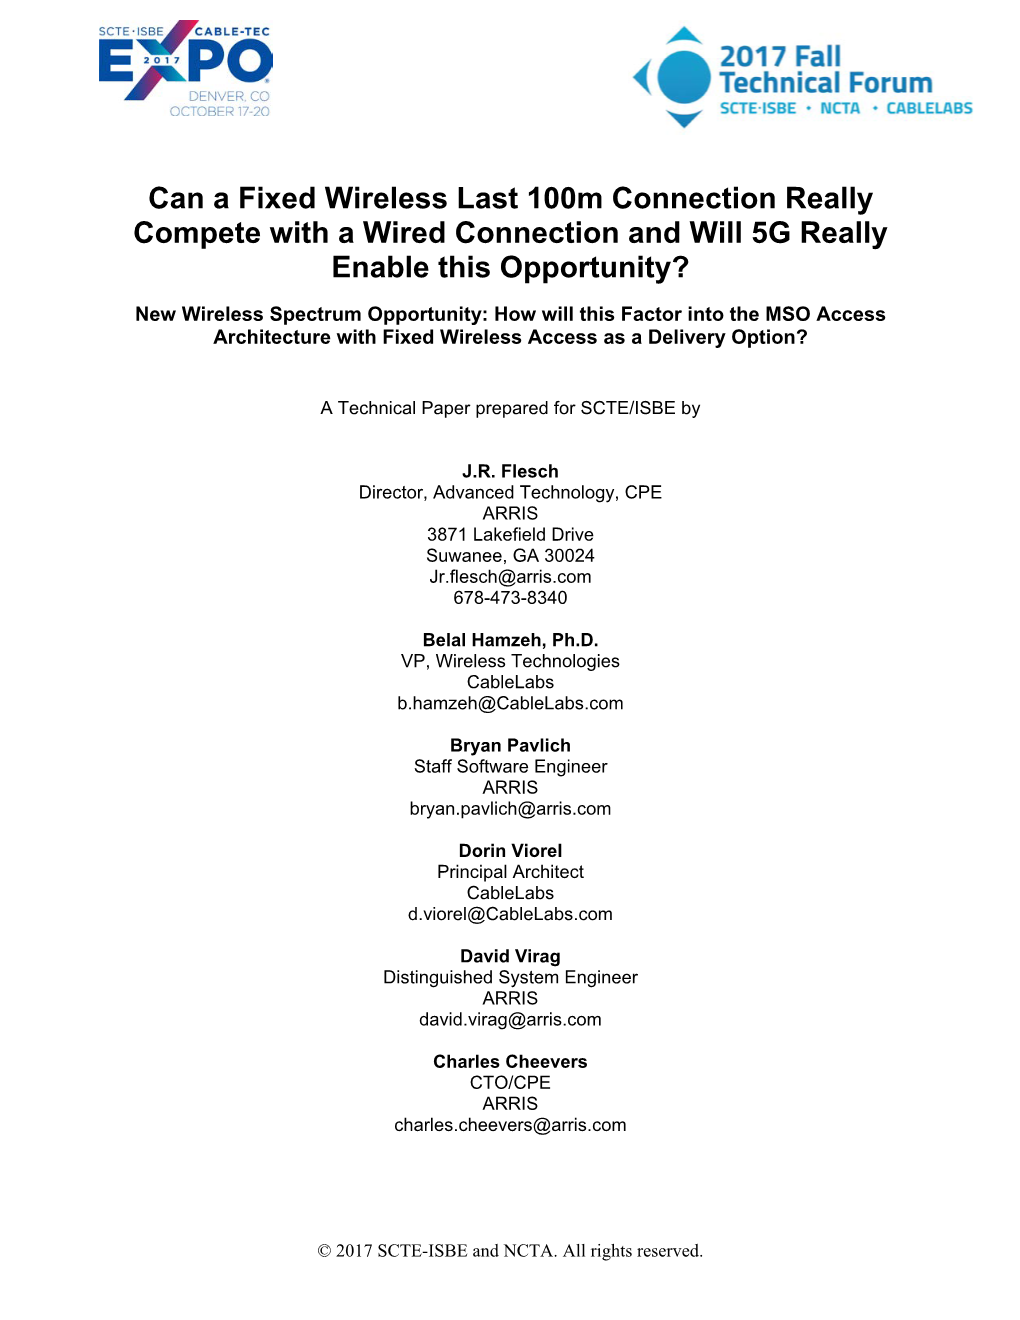 Can a Fixed Wireless Last 100M Connection Really Compete with A